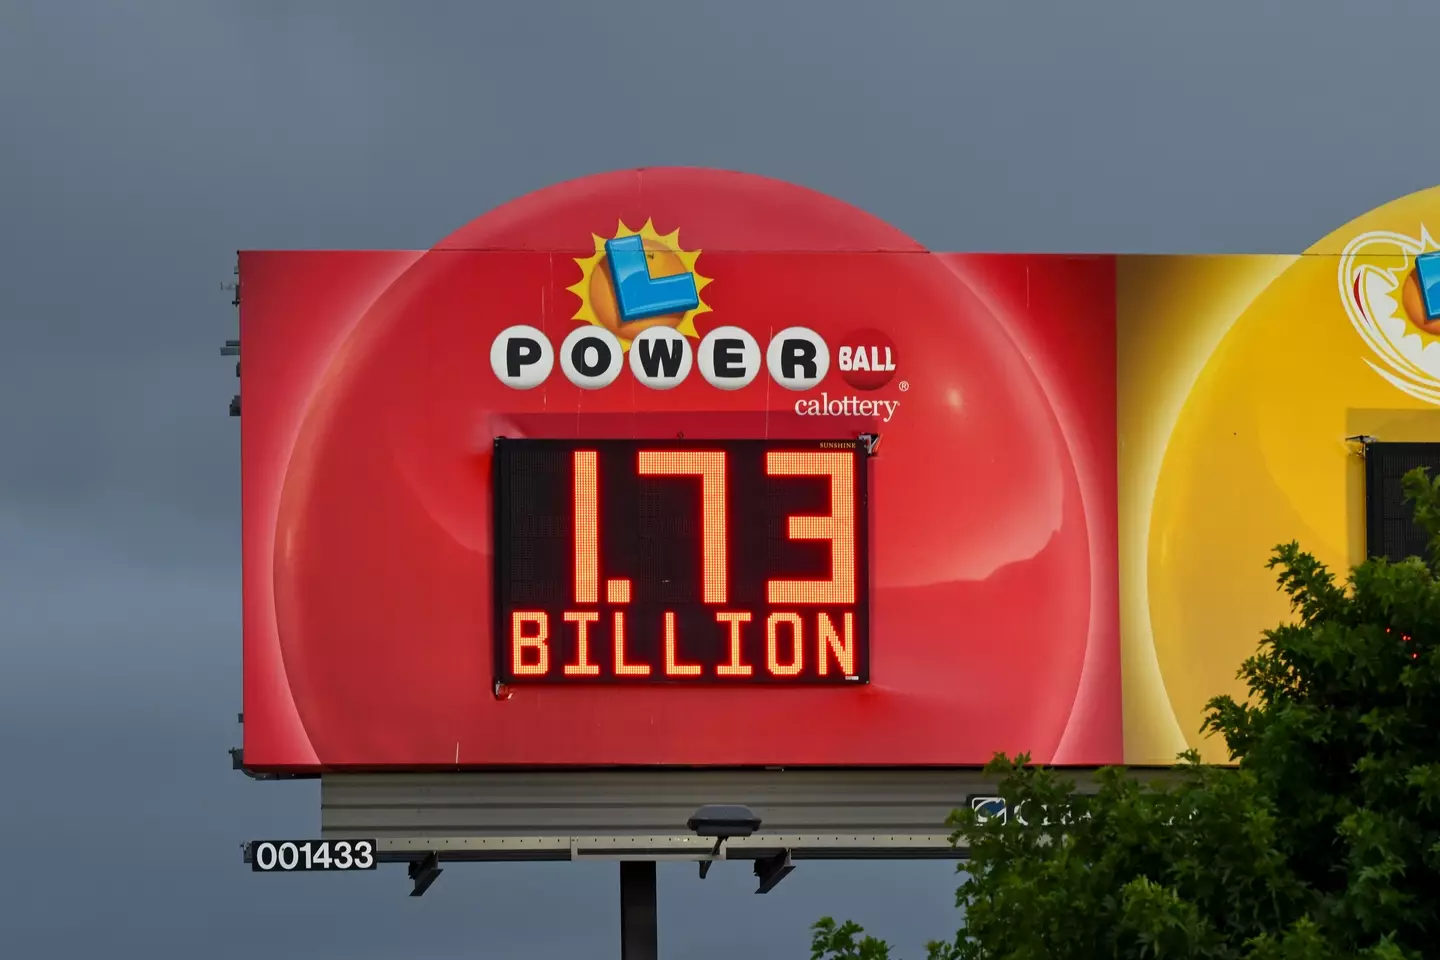 The Powerball win was a staggering $1.73 billion.